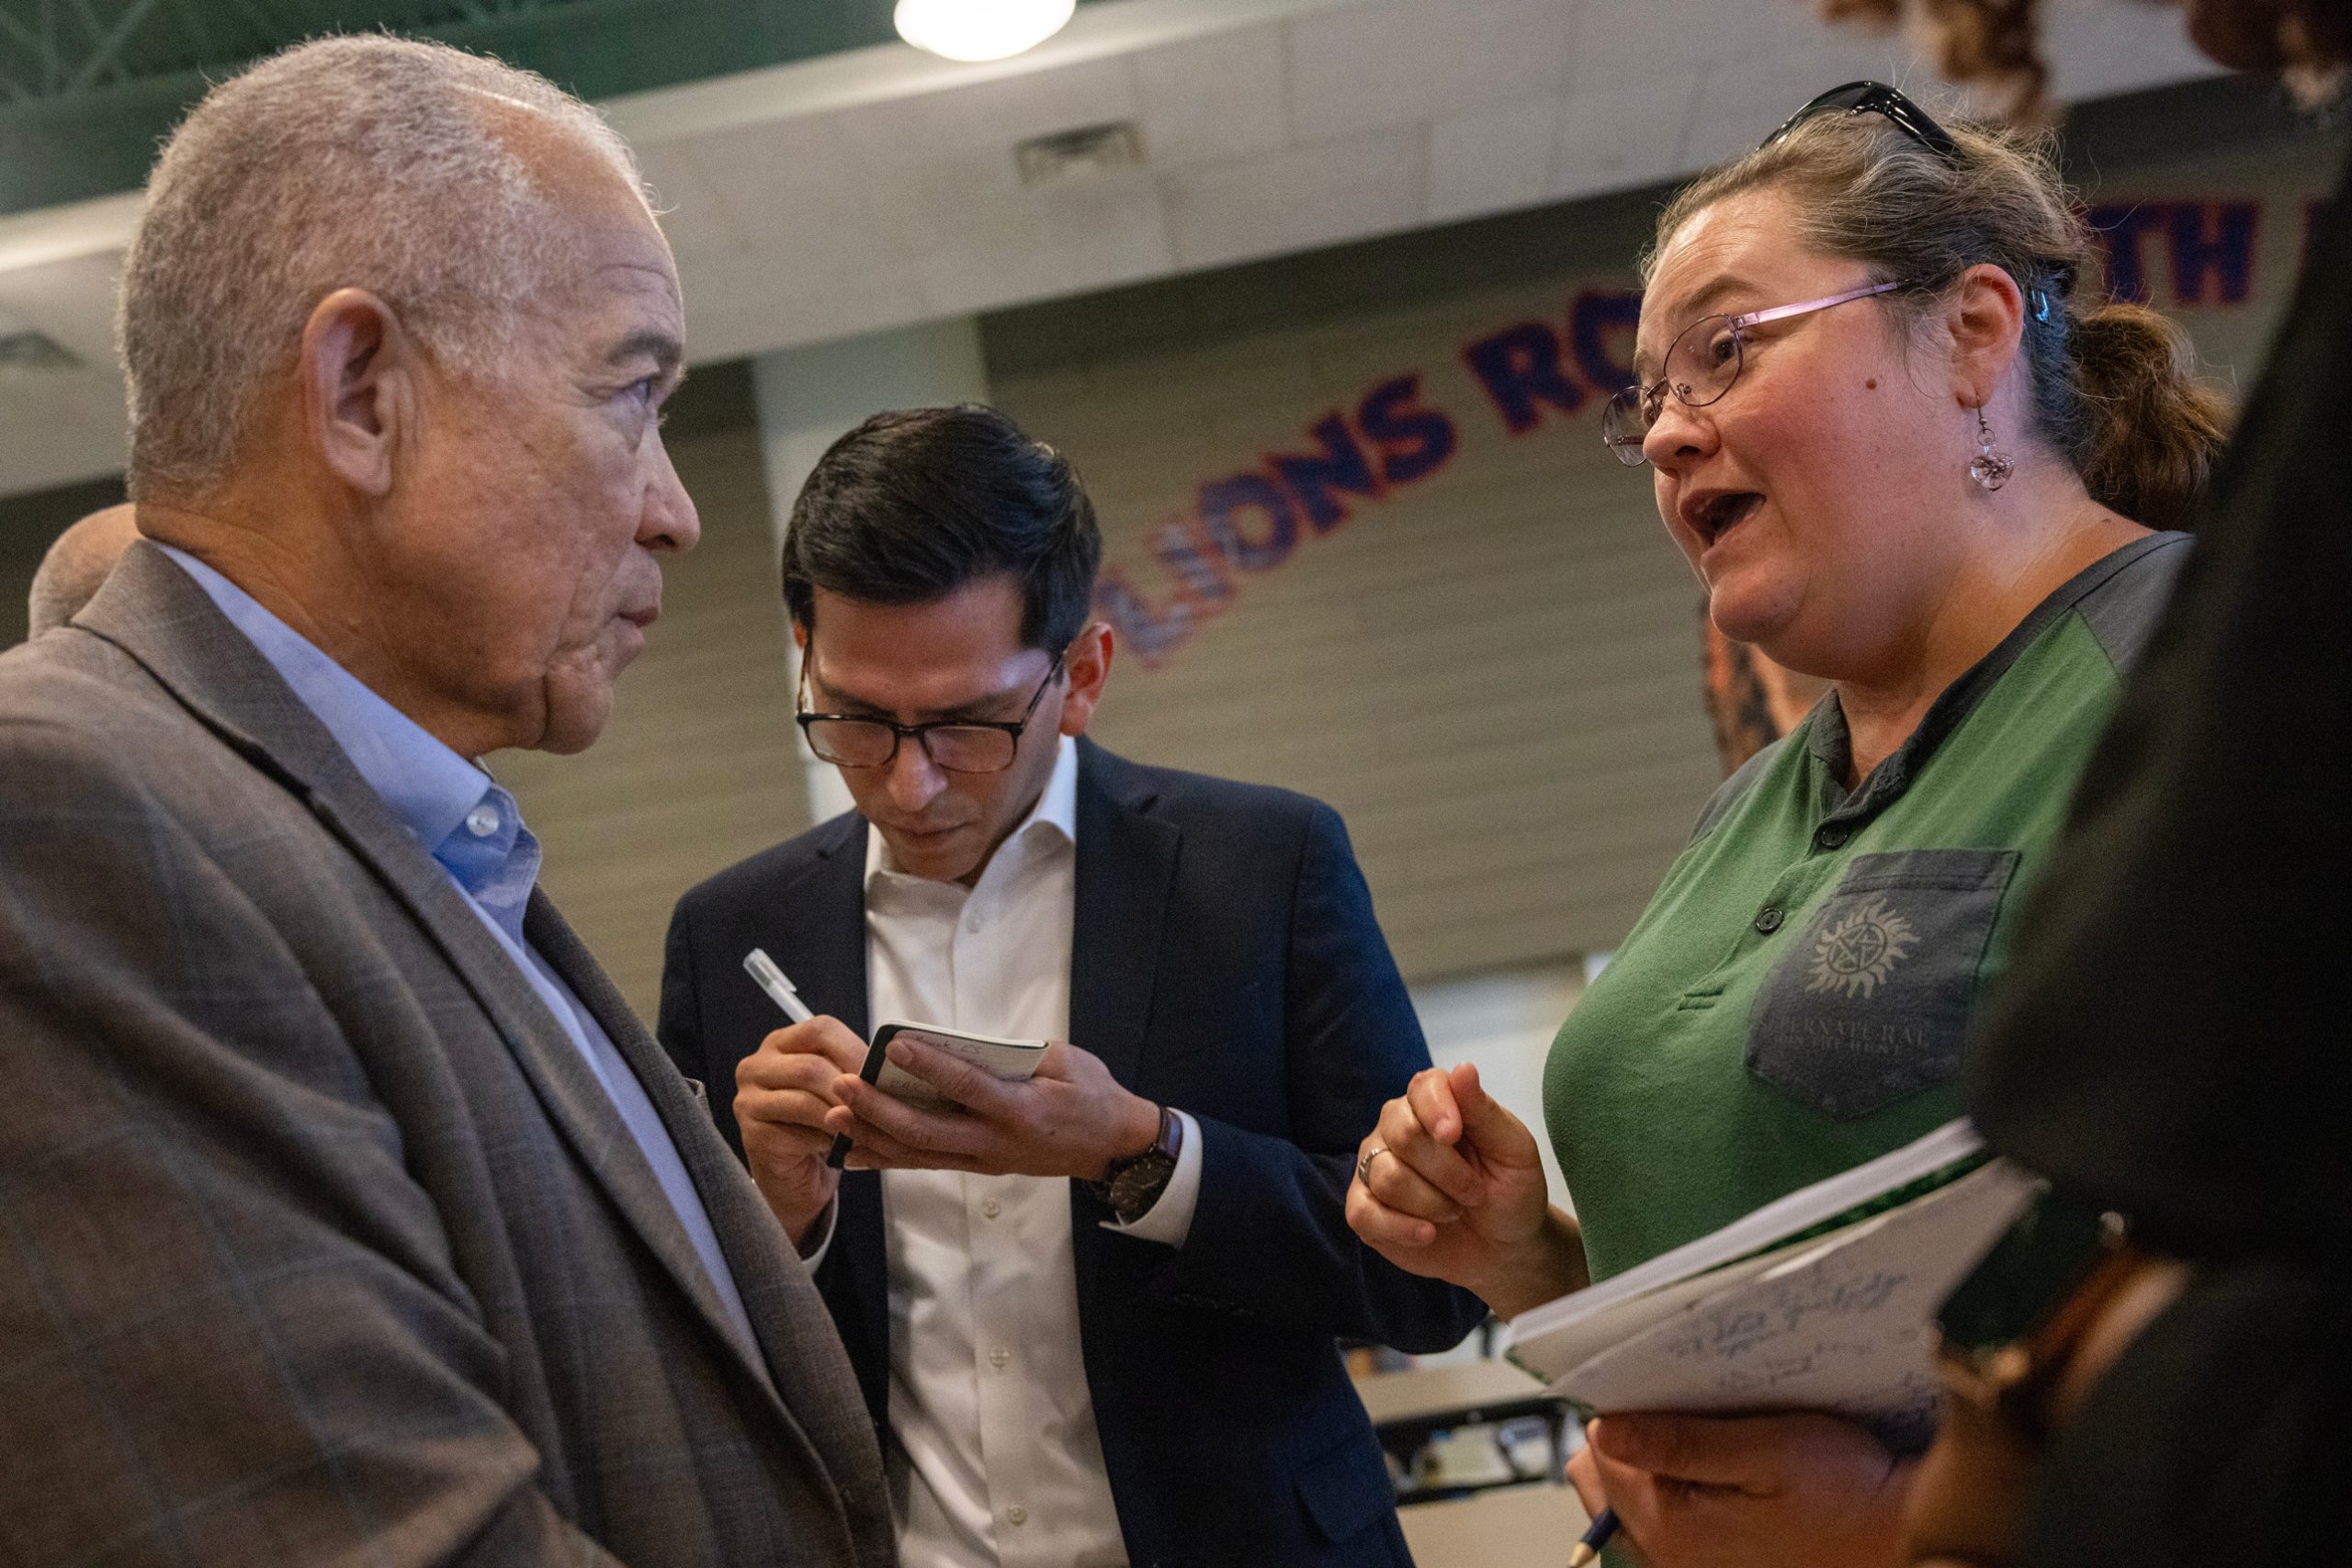 Houston ISD Superintendent Mike Miles speaks with Dana Castro after a community engagement event July 27 at Sugar Grove Academy on the district's west side